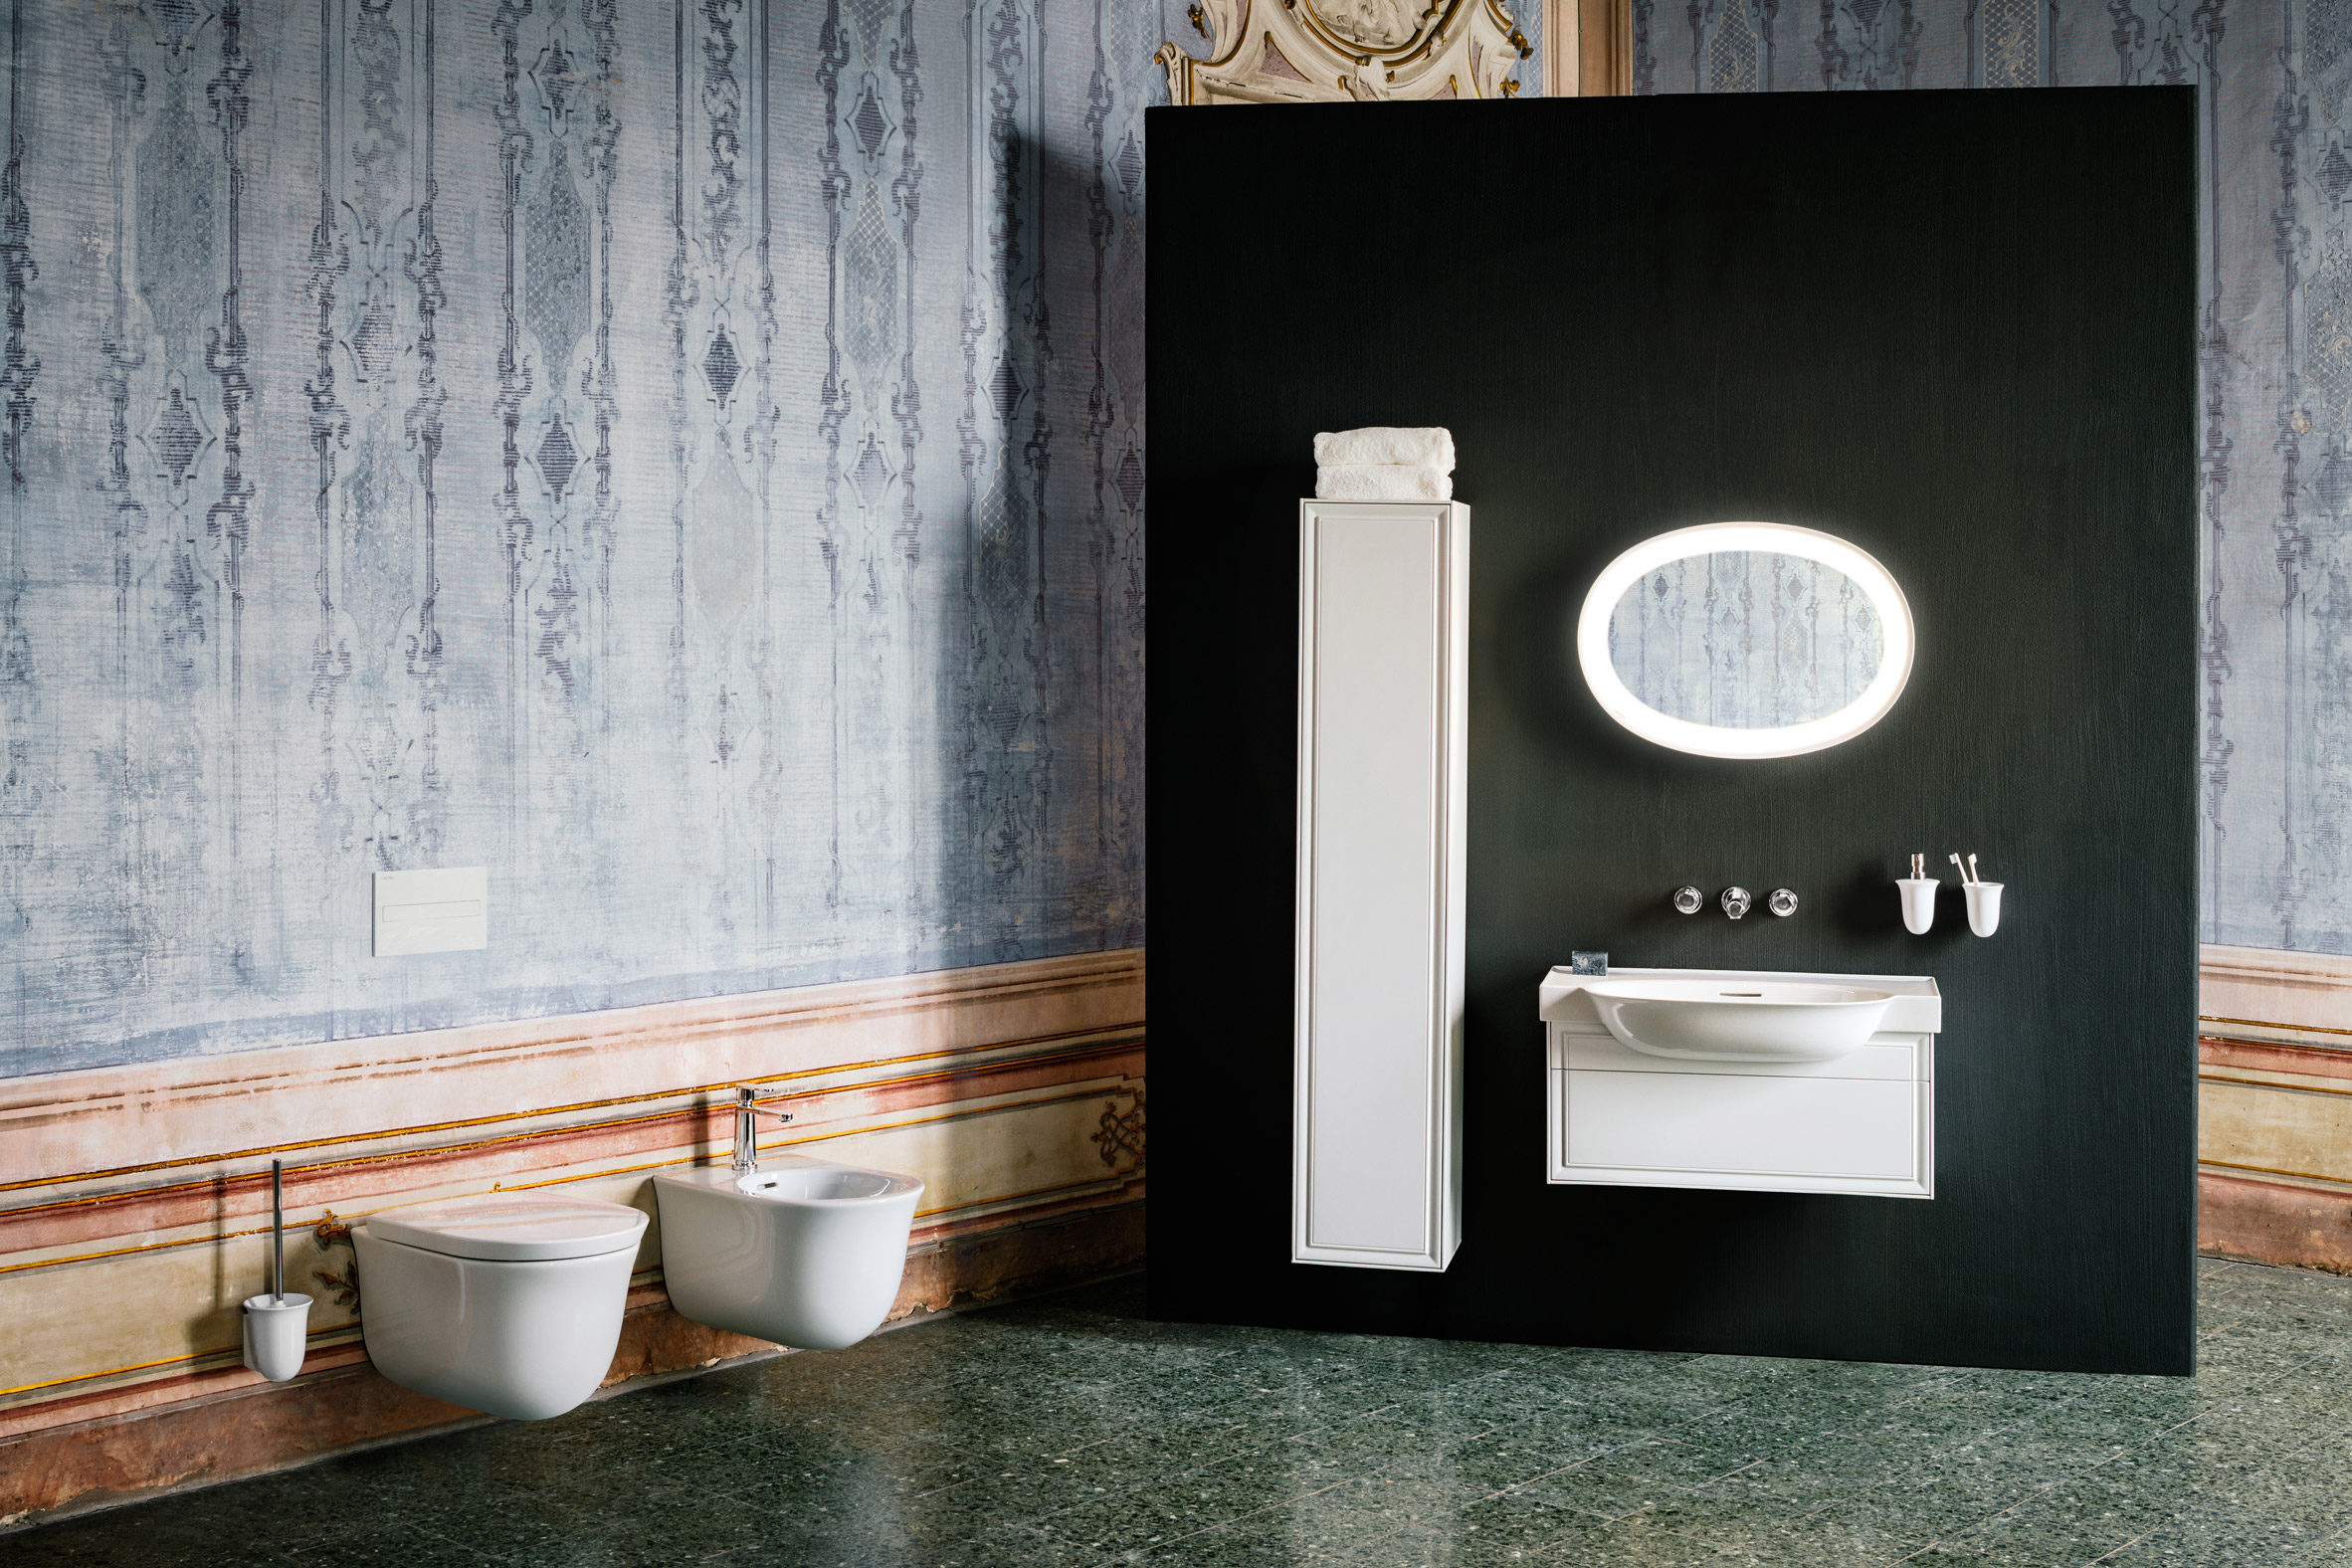 Marcel Wanders' New Classic collection for Laufen